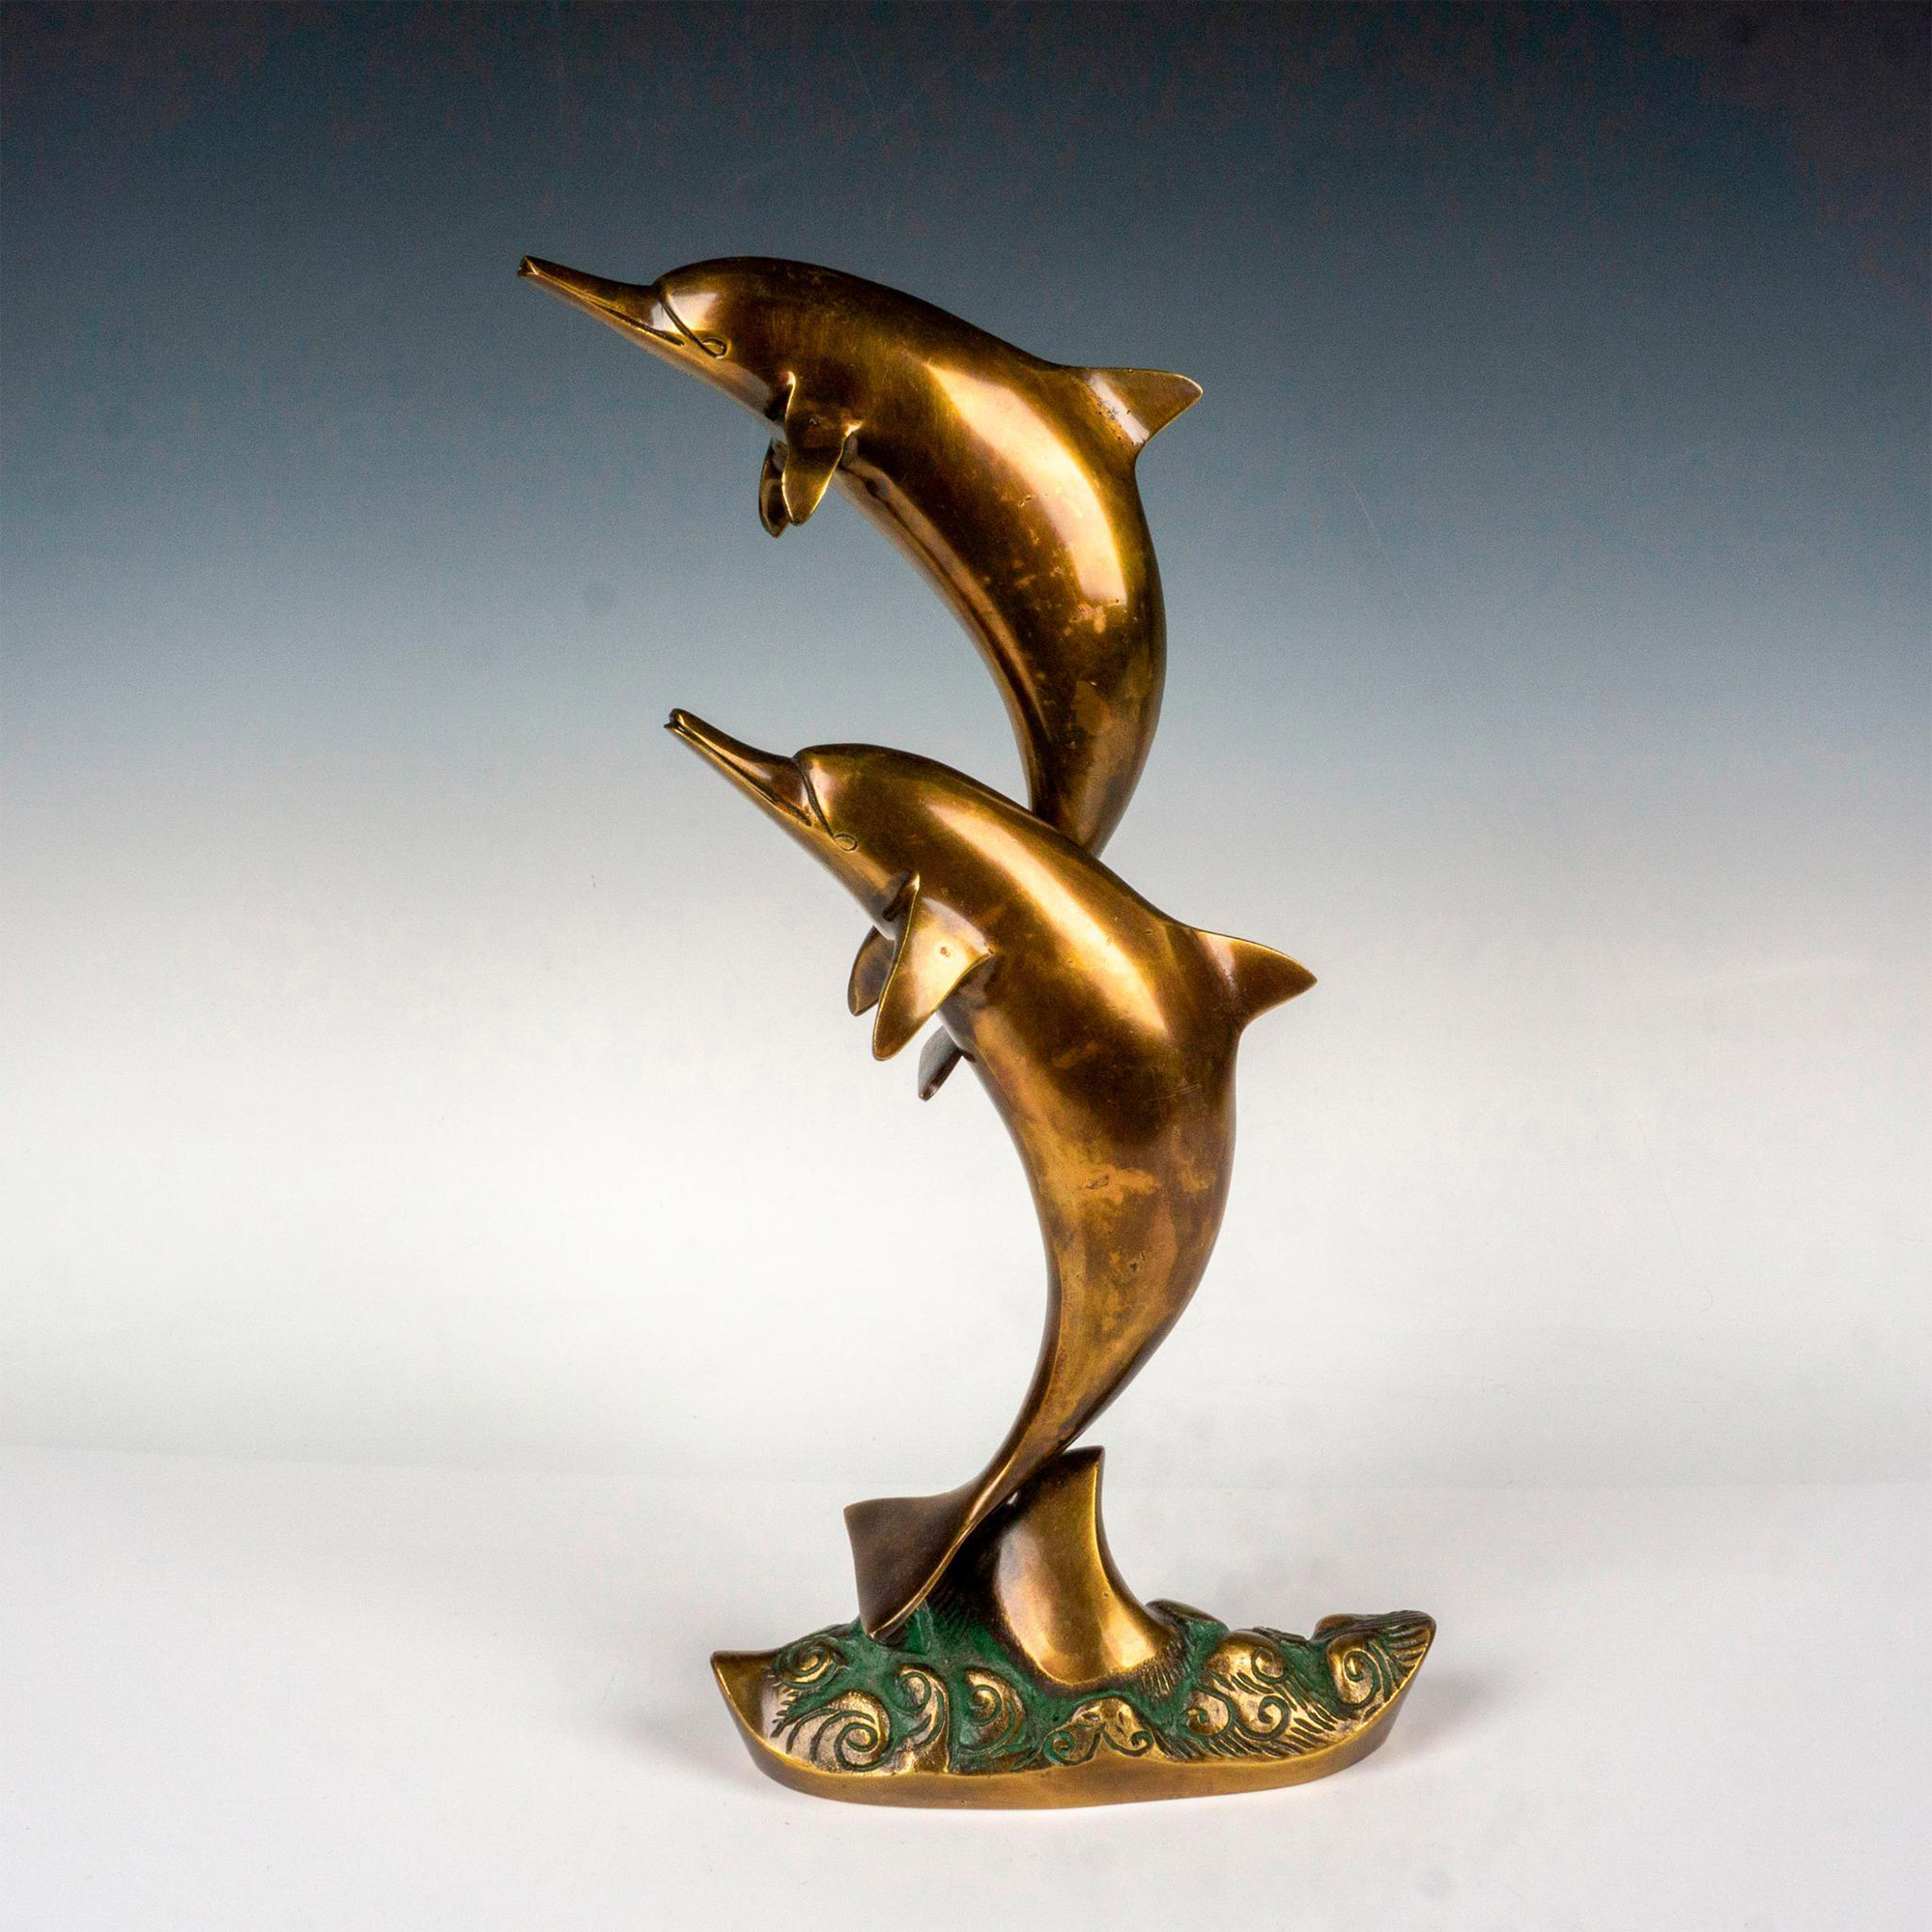 Bronze Sculpture Two Bottlenose Dolphins Swimming in Ocean - Image 2 of 3